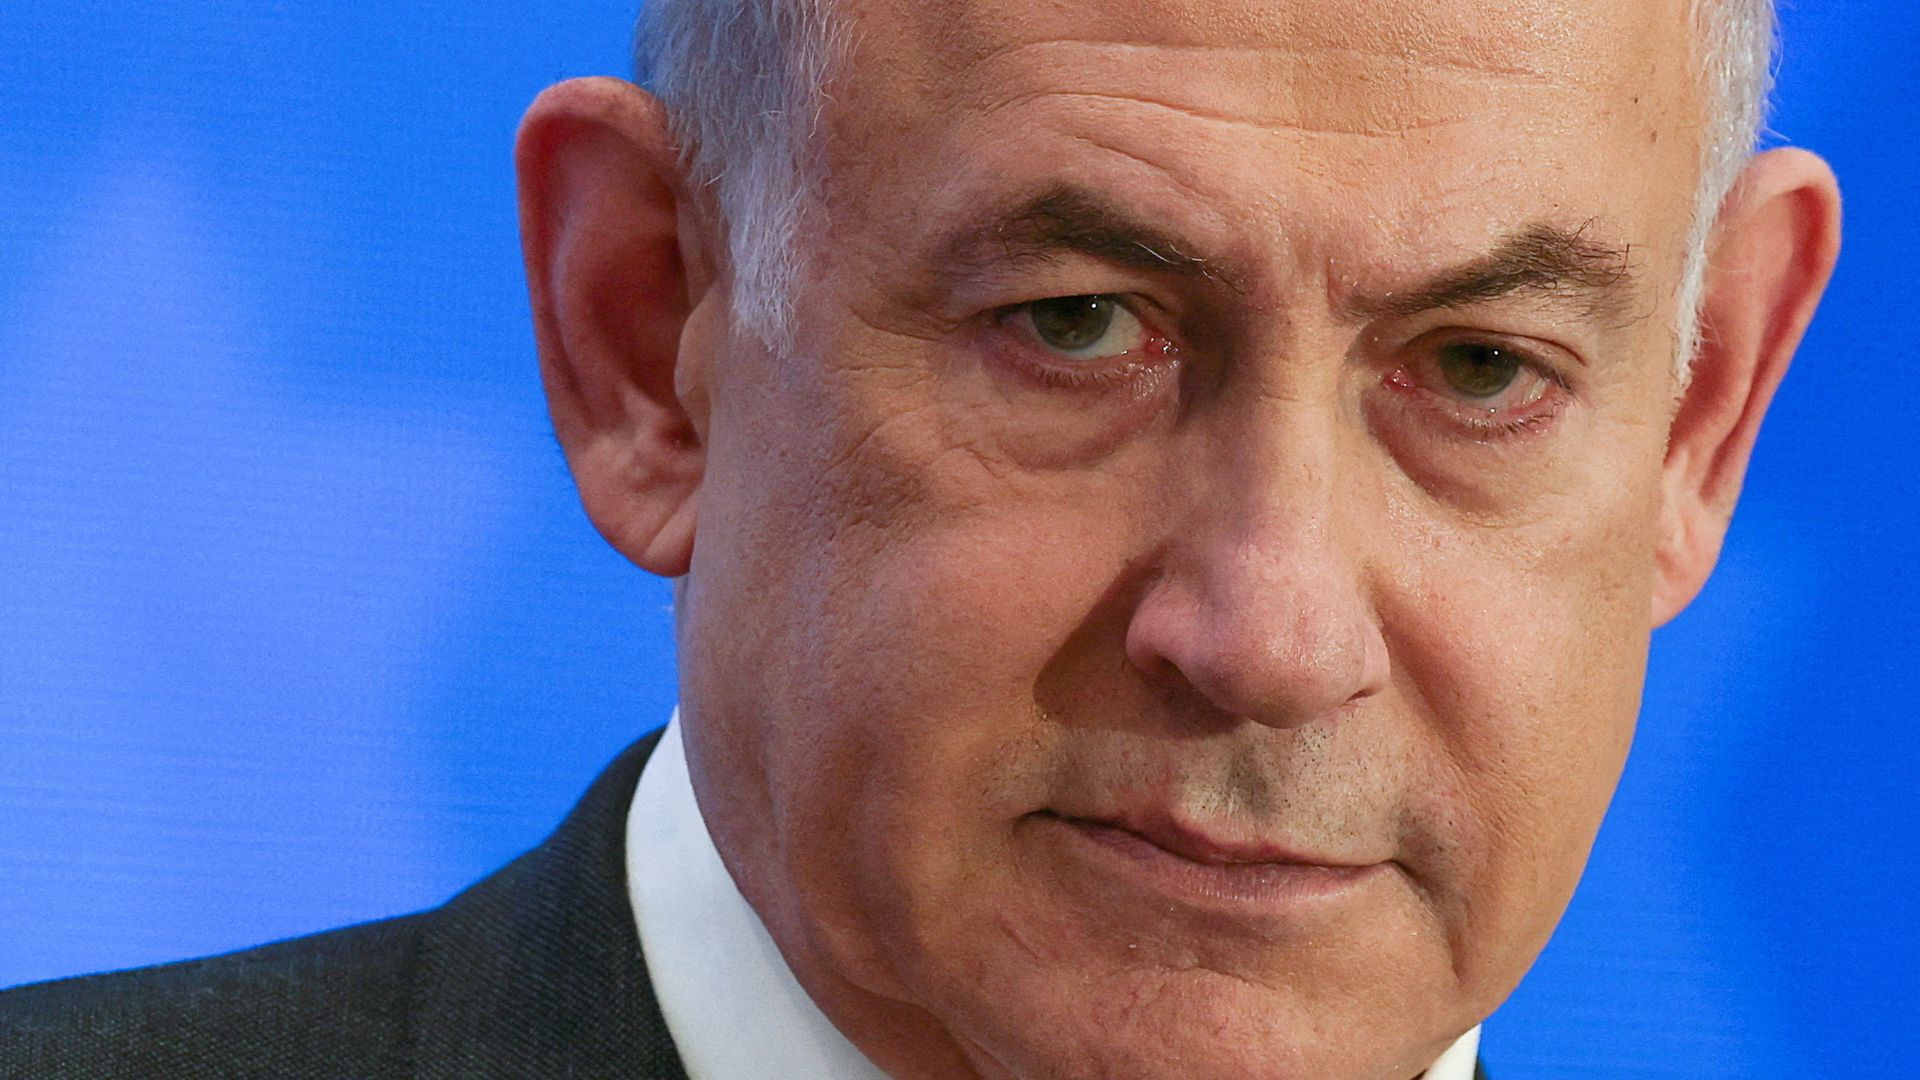 Netanyahu rejects ceasefire deal and shuts major TV network's operations in Israel